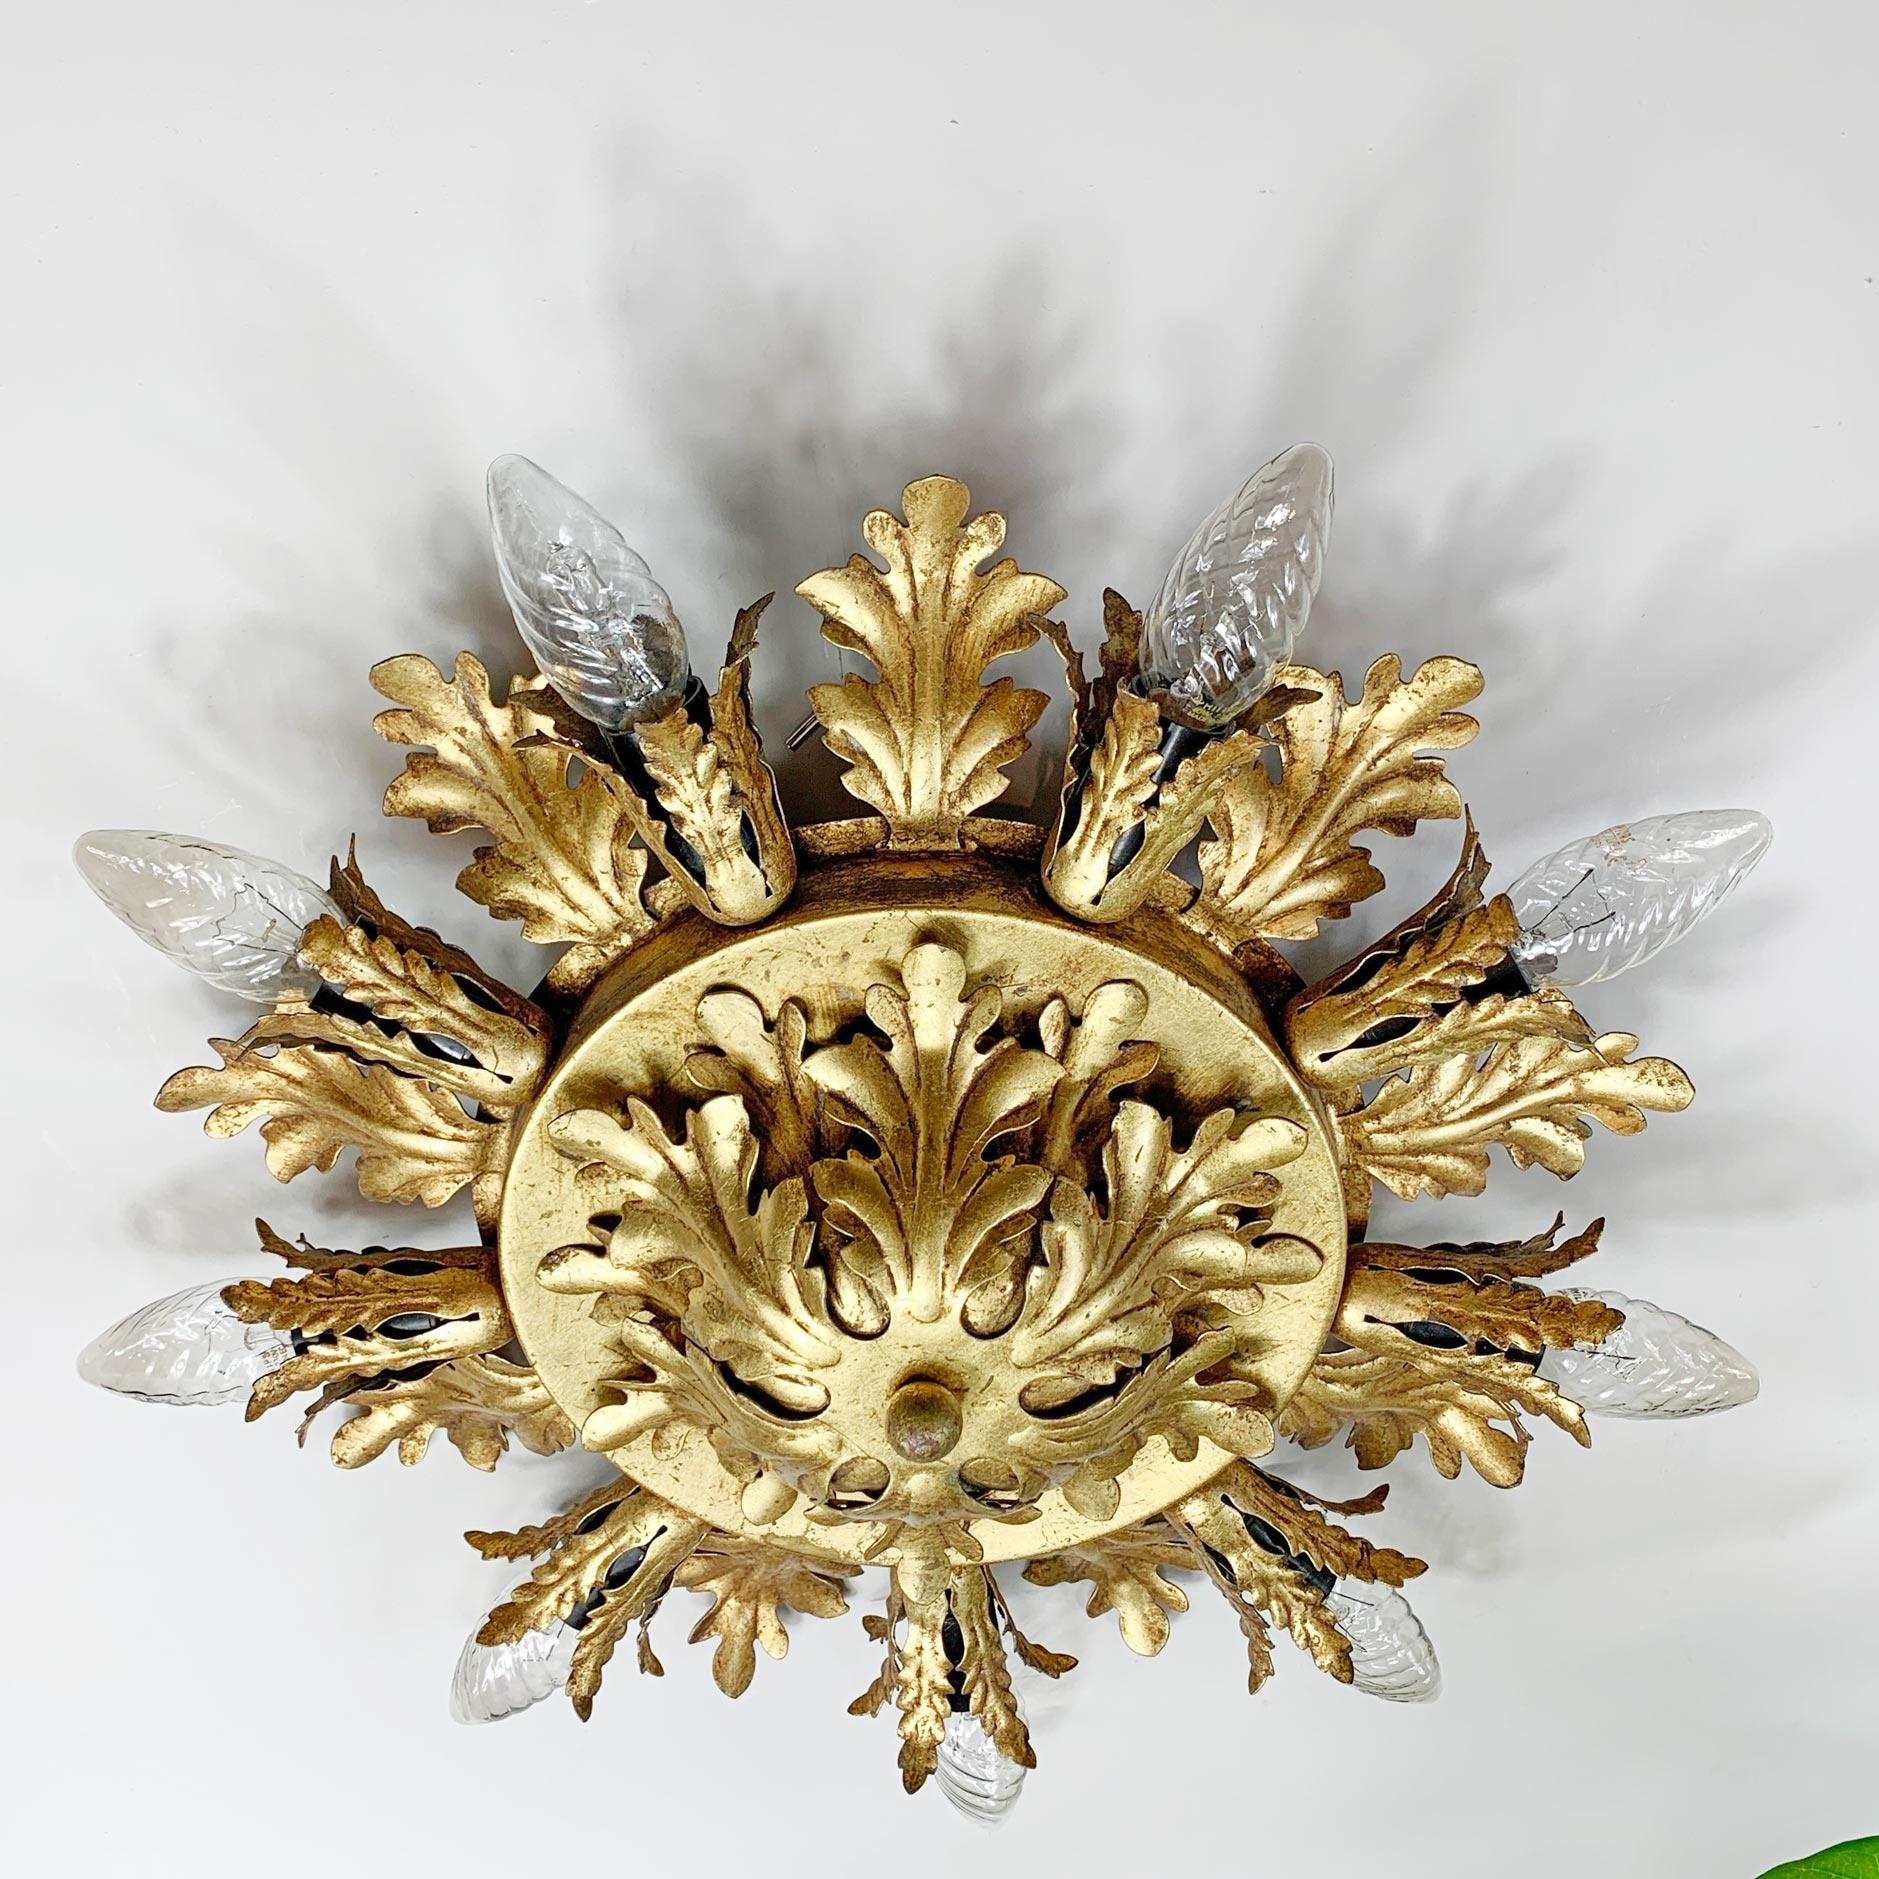 Italian florentine flush mount ceiling light, Banci Firenze, Italy, 1950s 
Stunning Gold Acanthus Leaf Design in original gilt finish

42cm width 13cm depth (Protrusion From Ceiling)

9 Bulb Holders, E14 Small Screw In 
The light has original